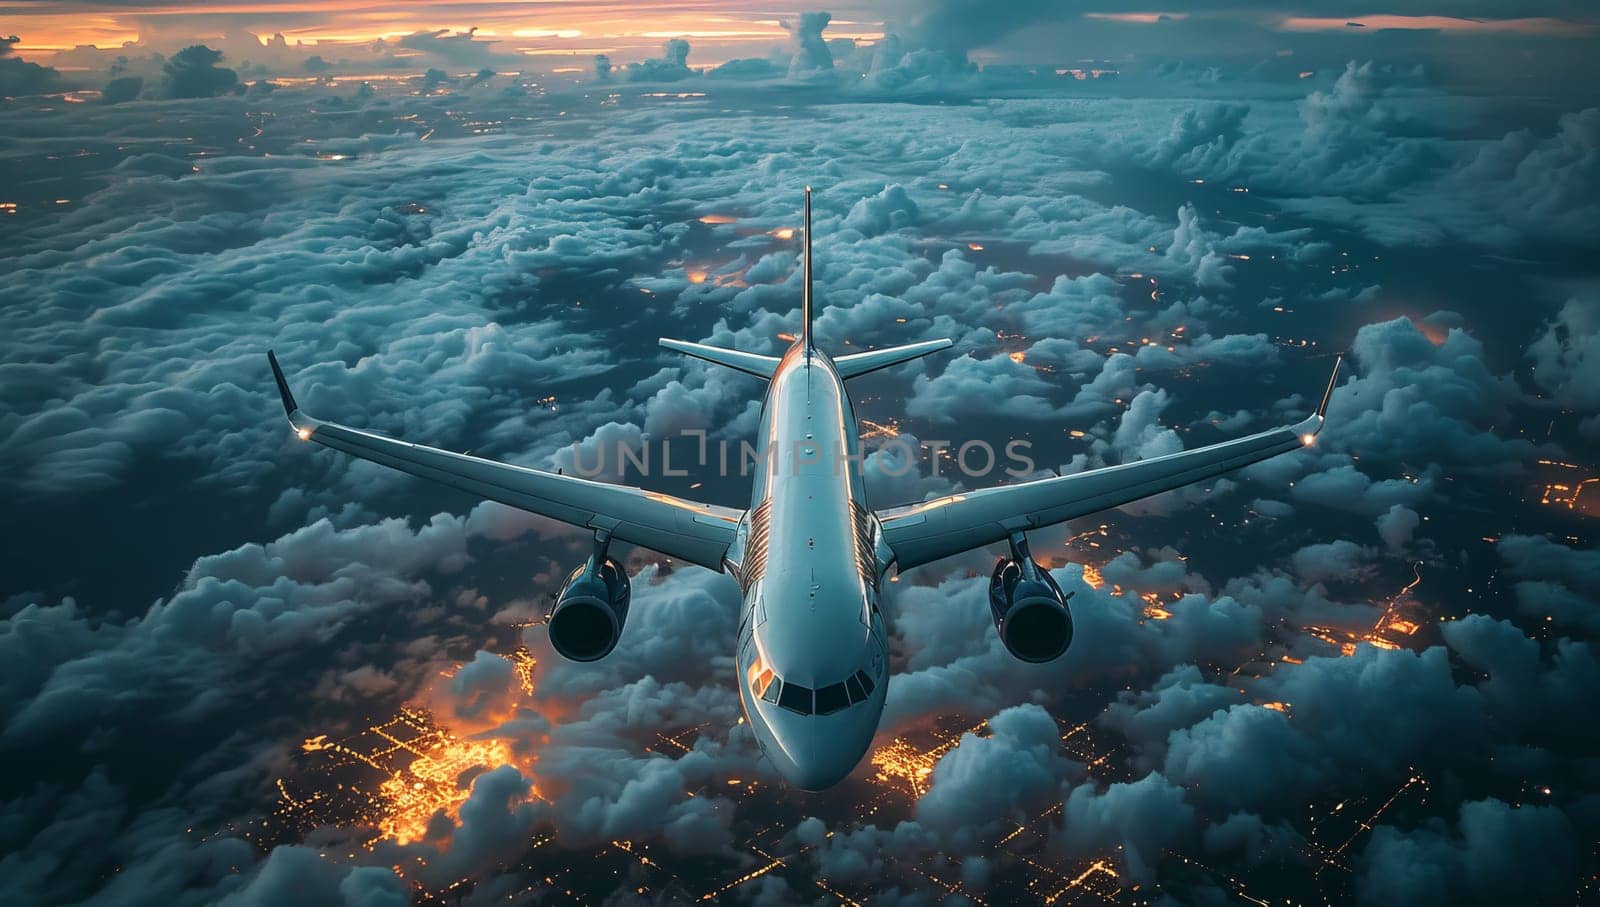 Airplane ascending through clouds over illuminated city at dusk by ailike